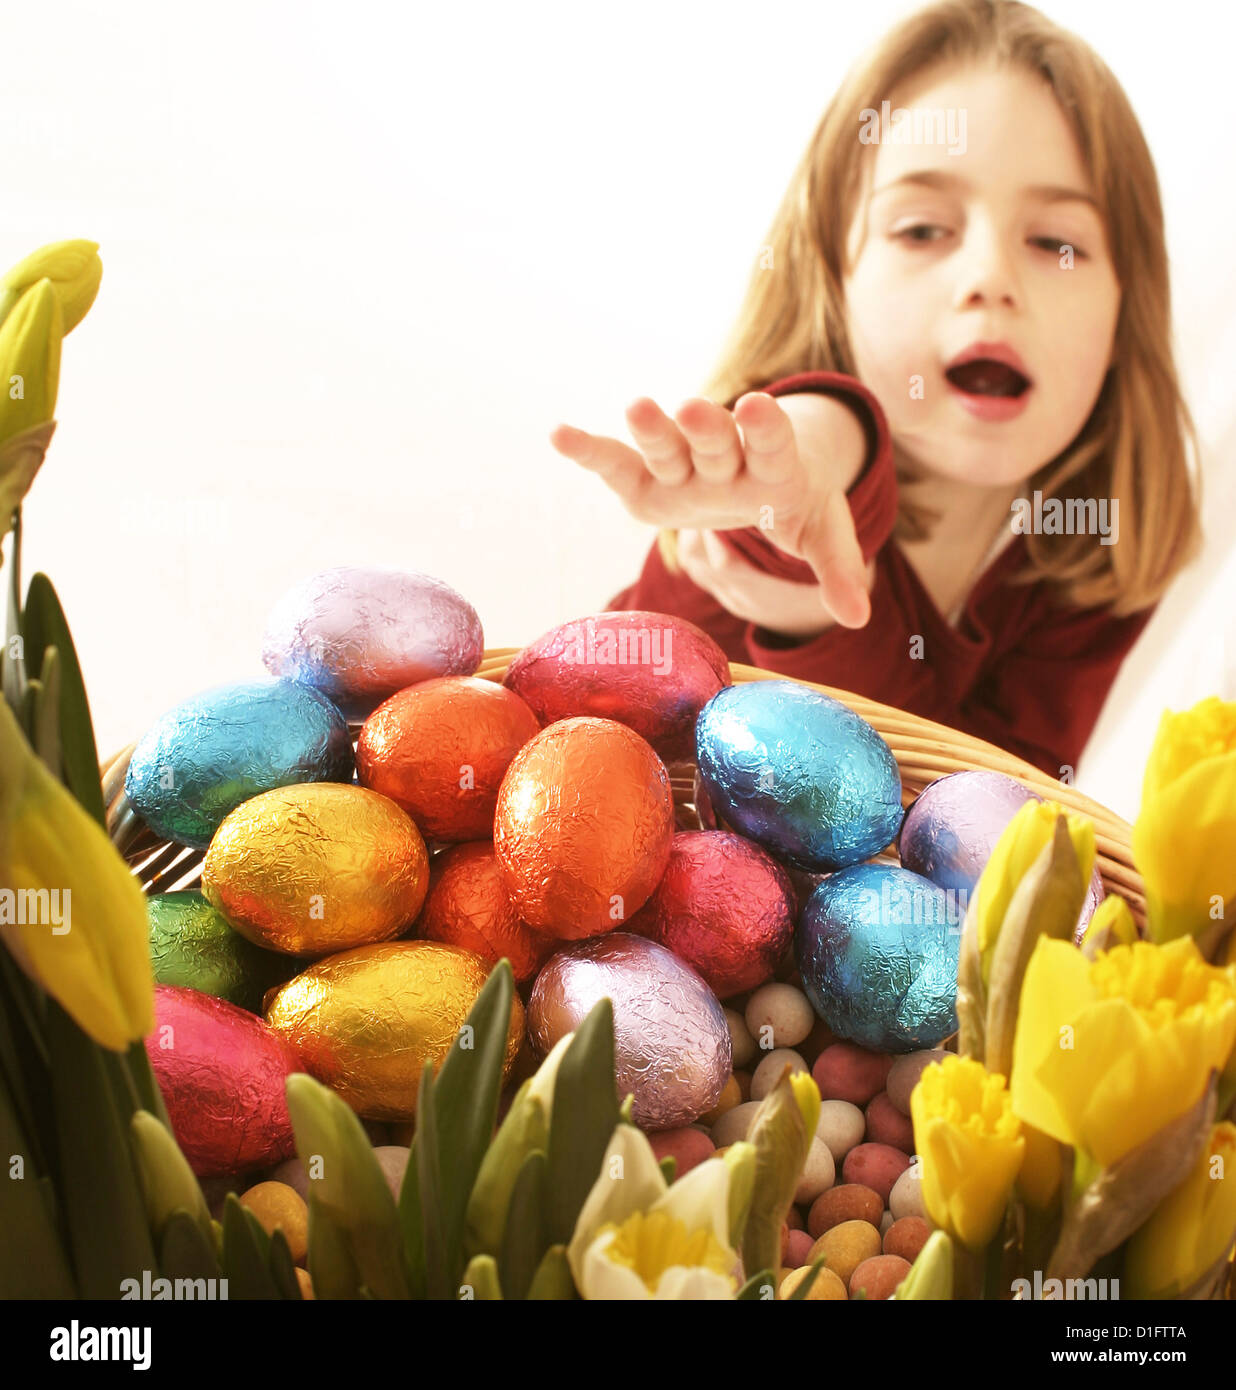 young girl reaching for coloured foil covered Easter eggs in basket surrounded by daffodils Stock Photo